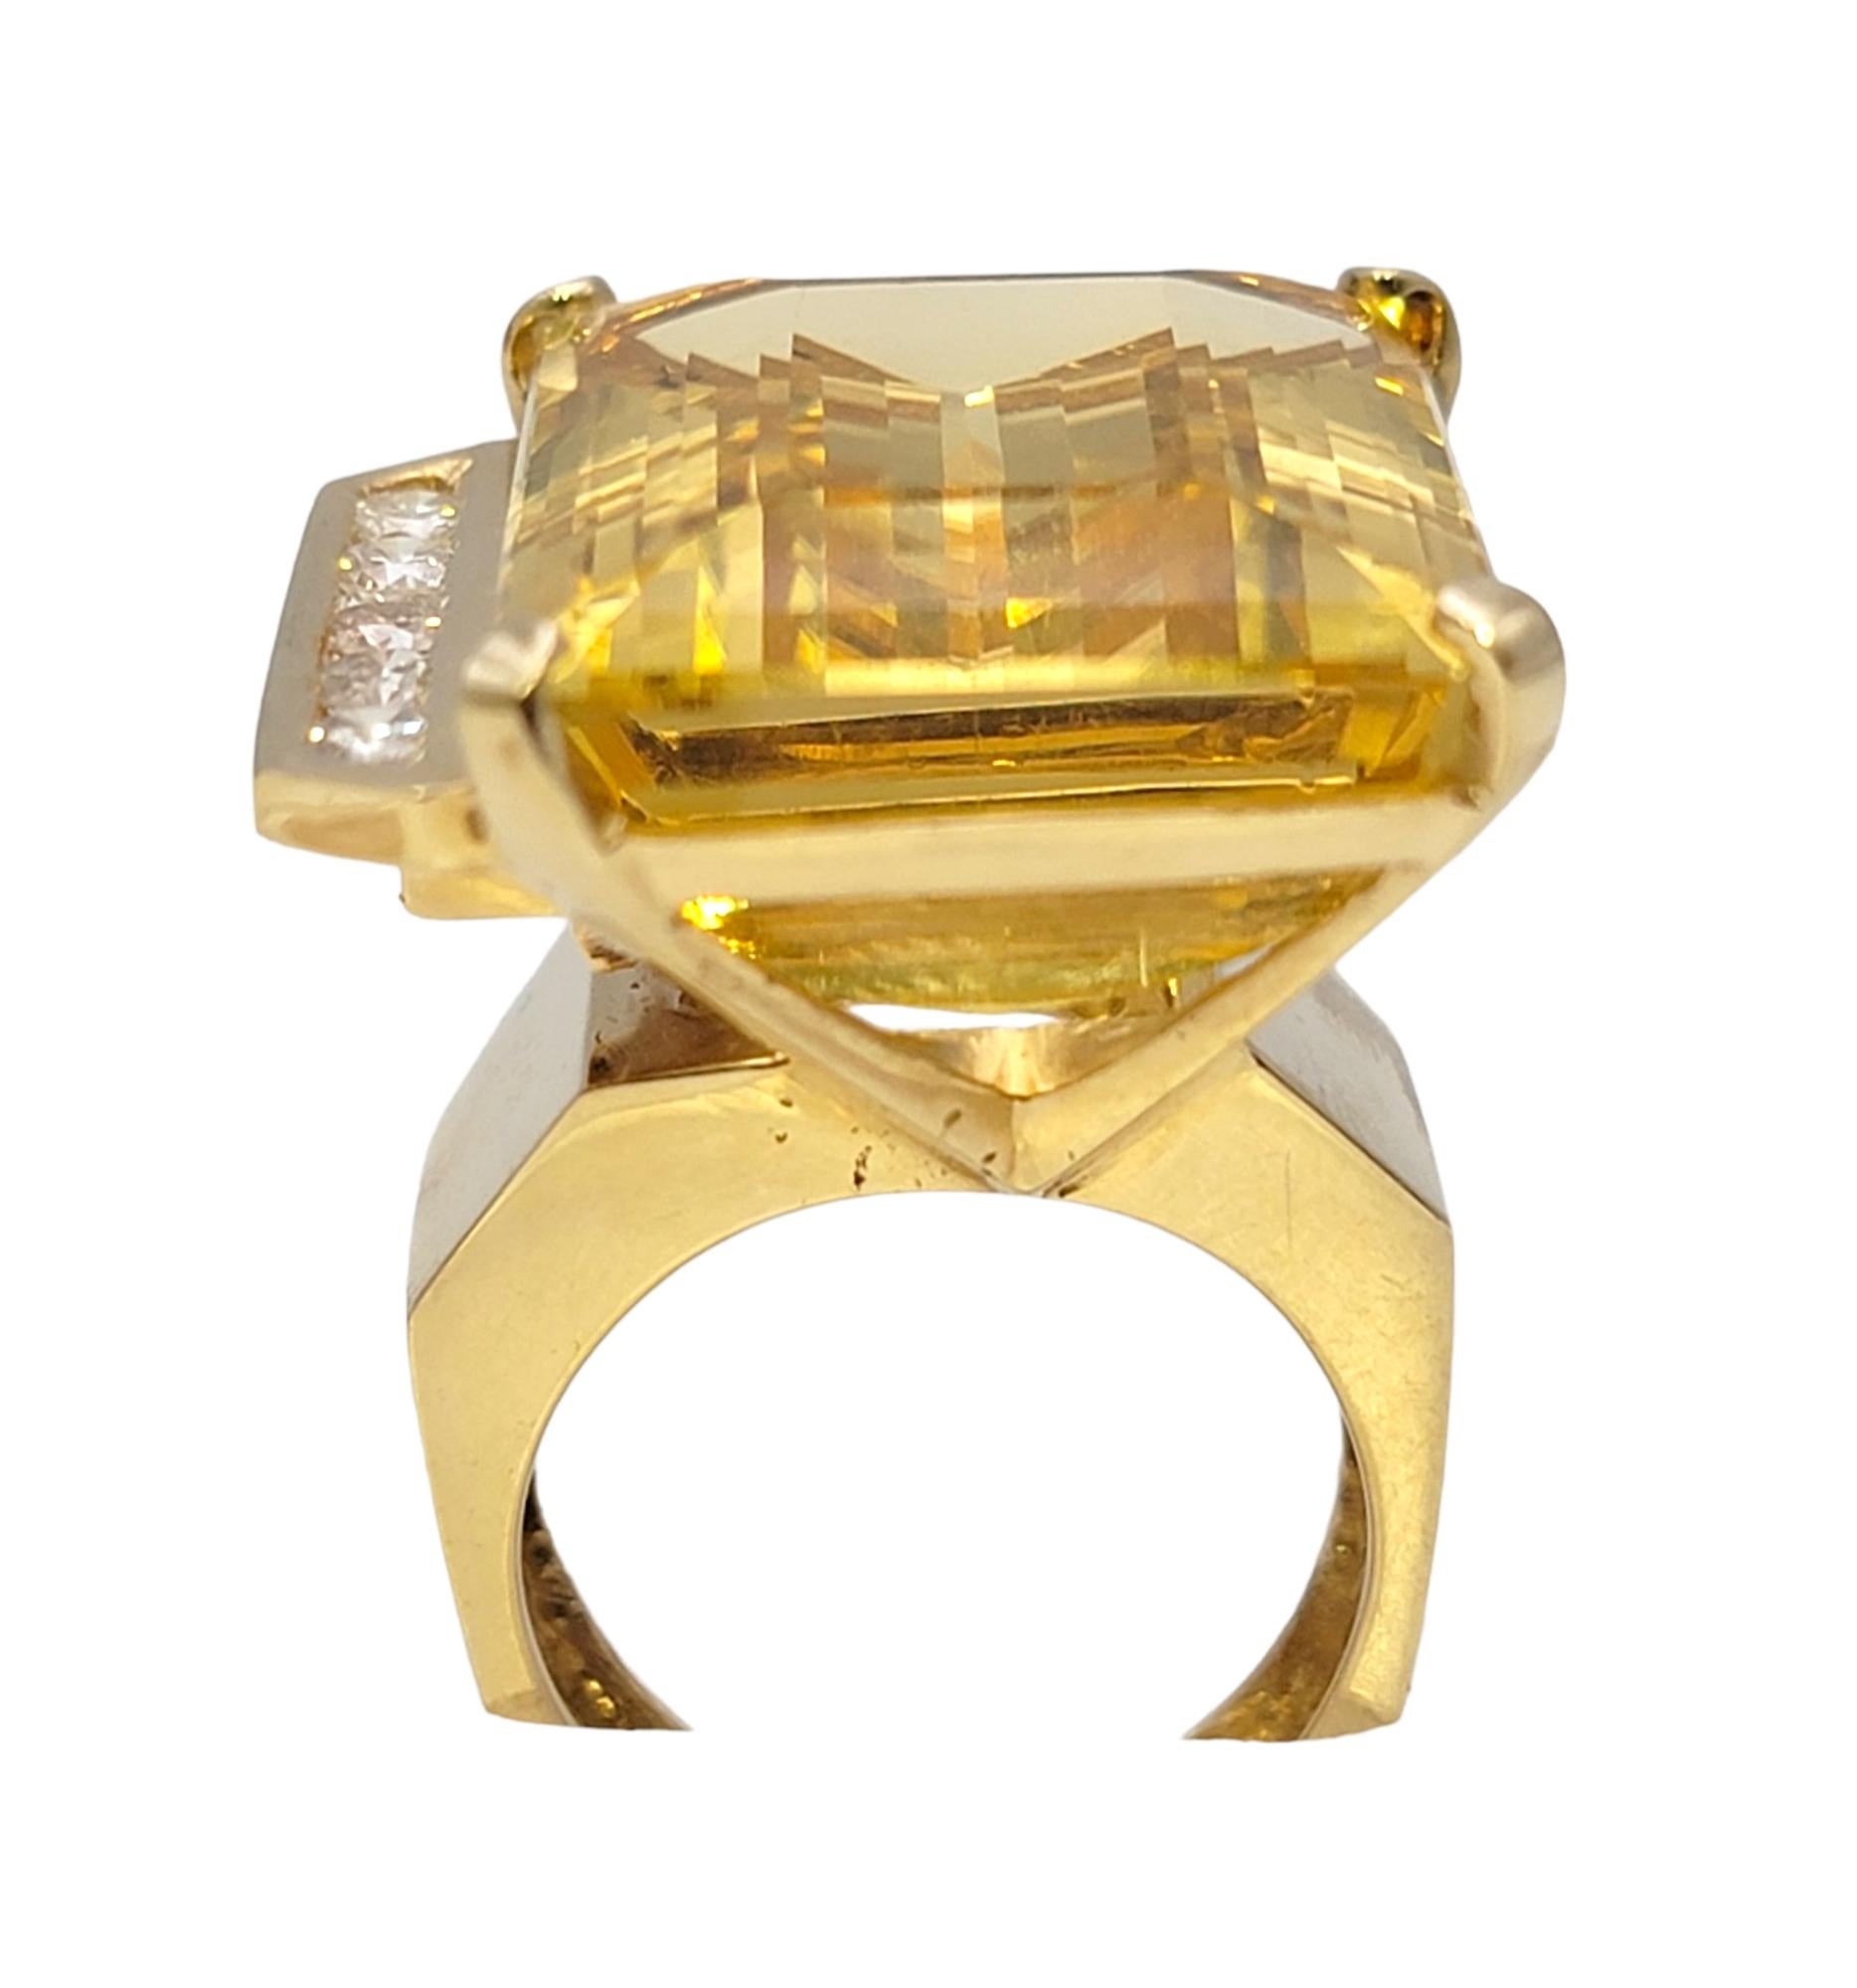 Huge 32.31 Carat Total Emerald Cut Citrine and Diamond Cocktail Ring Yellow Gold For Sale 2